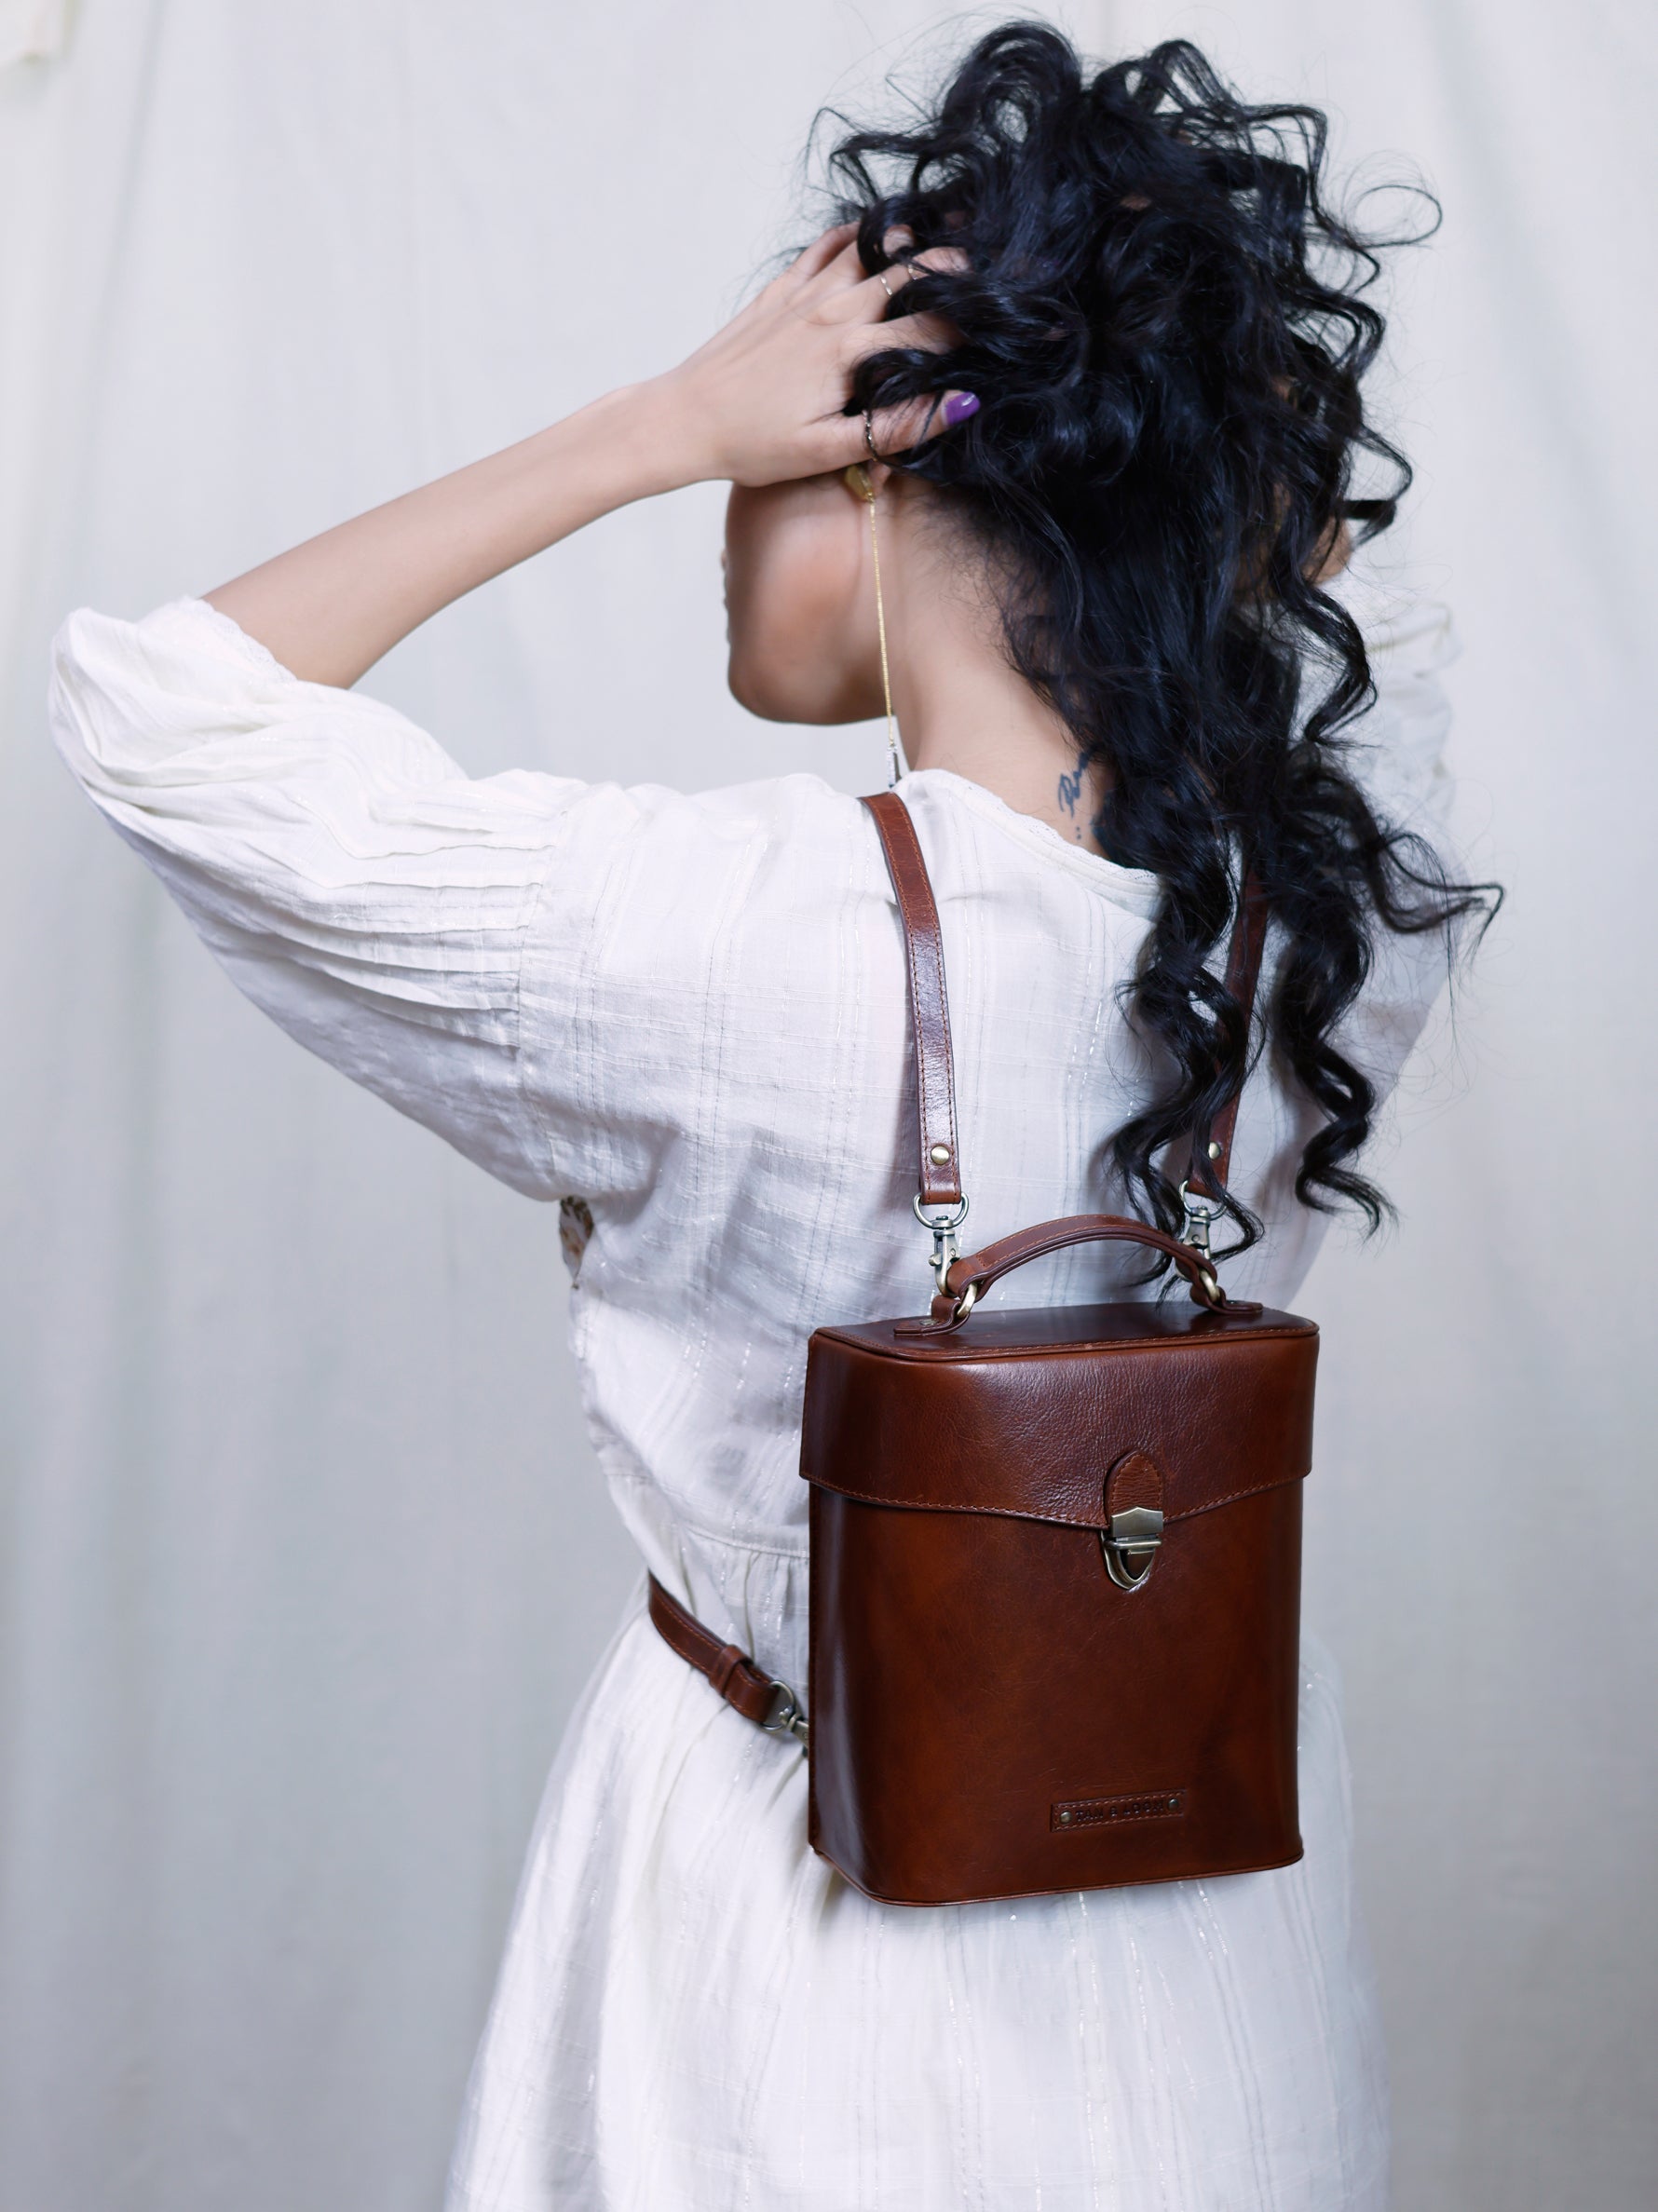 Handcrafted Genuine Vegetable Tanned Leather Letter Box Backpack Tuscany Tan for Women Tan & Loom